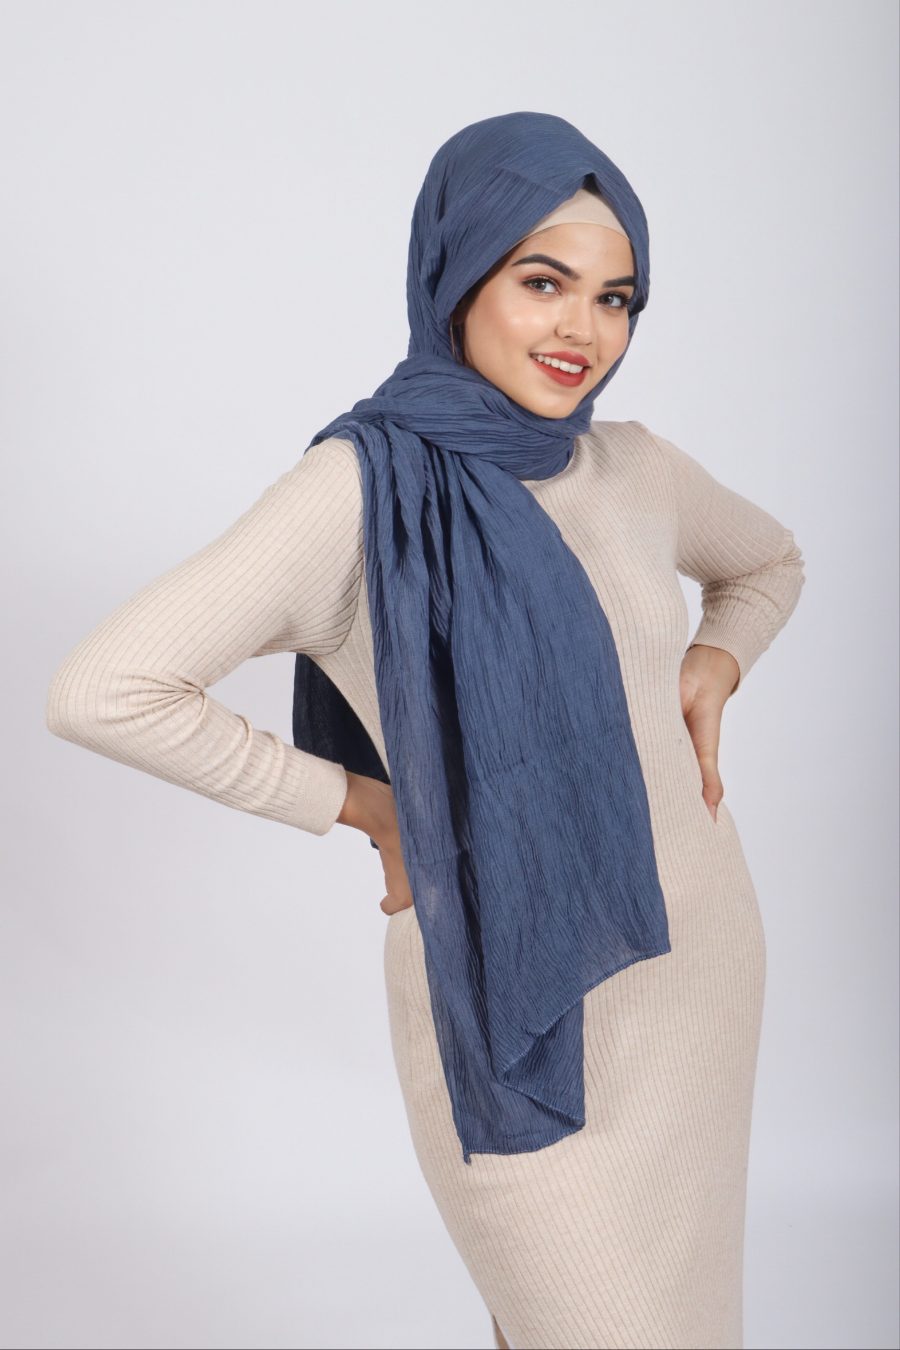 Ribbed Cotton Hijabs Archives - Cloak Couture